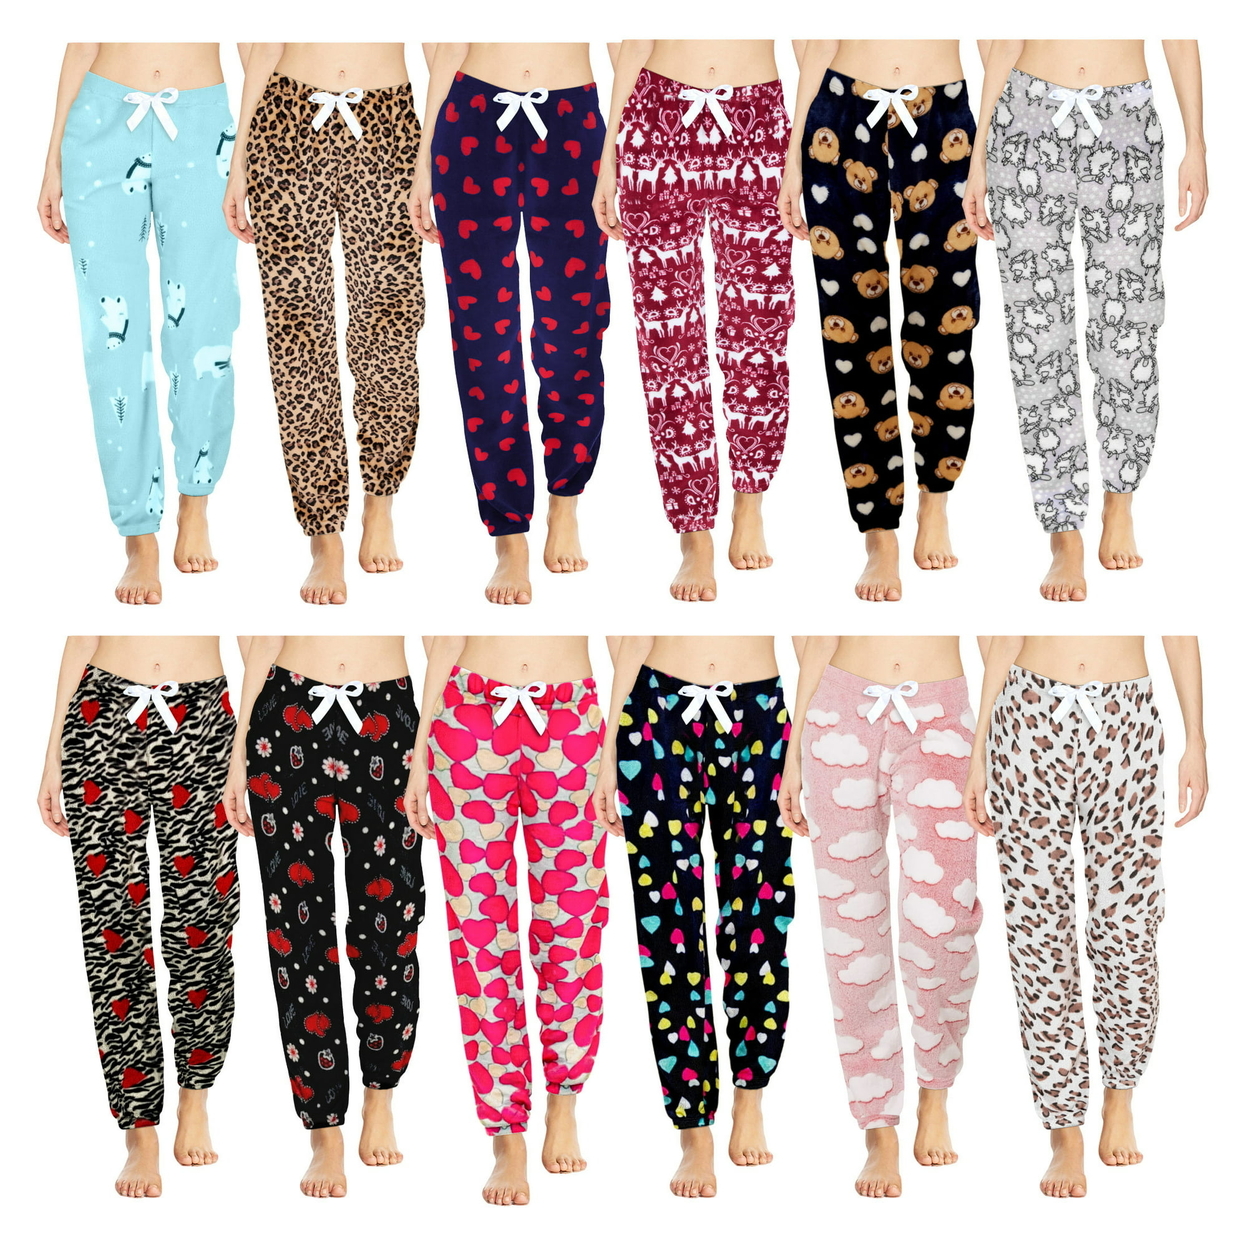 3-Pack: Women's Printed Ultra-Soft Comfy Stretch Micro-Fleece Pajama Lounge Pants - X-large, Shapes